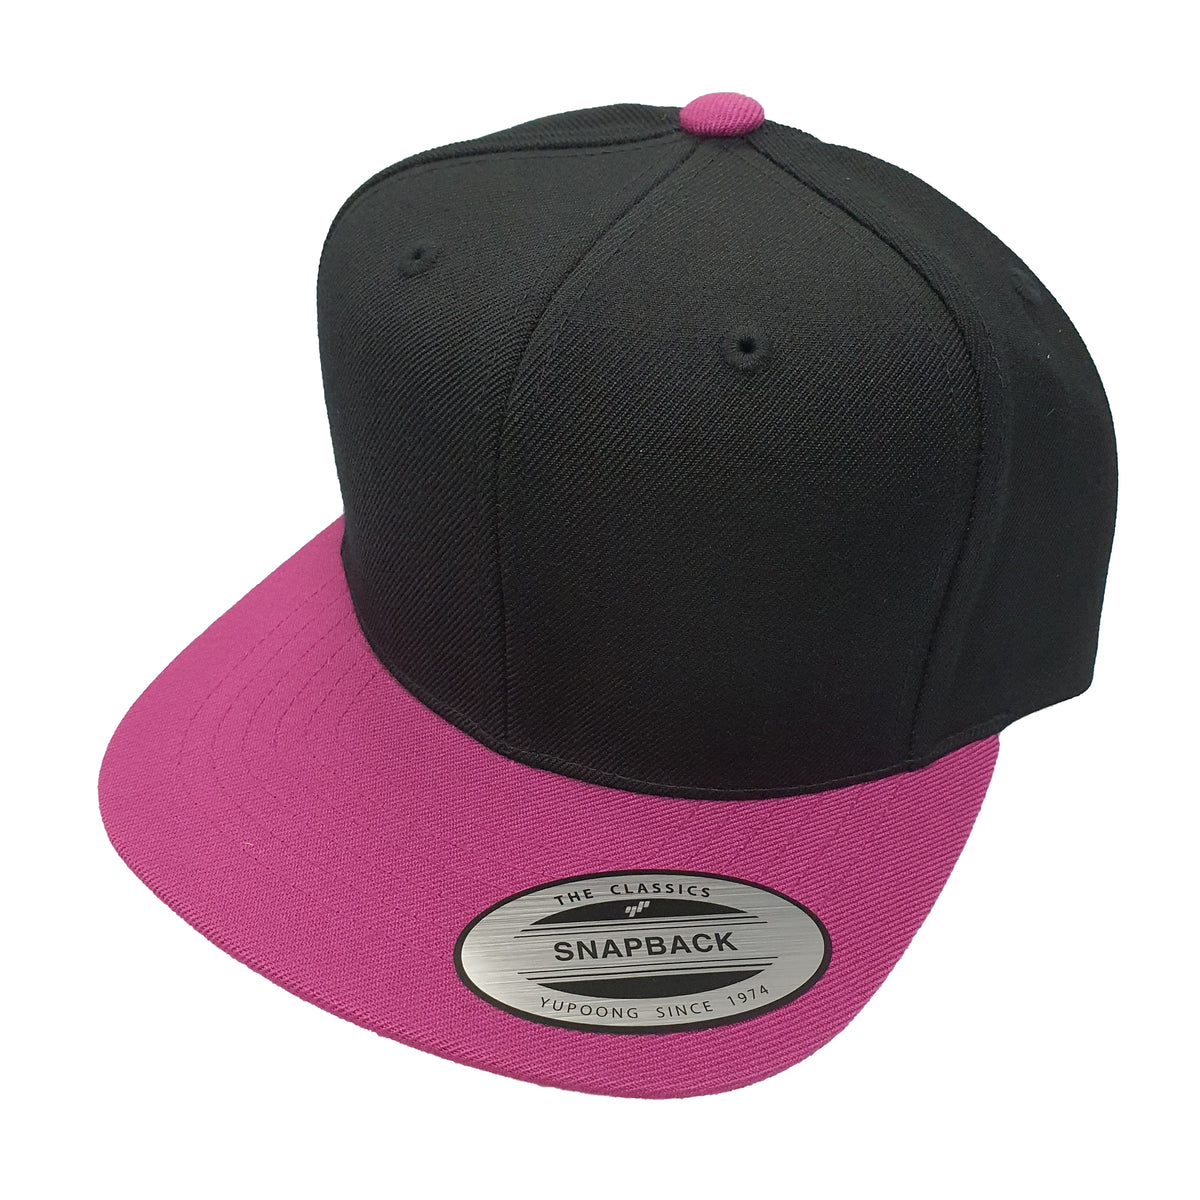 FLEXFIT Black on (Youth) Get information Classic our Snapback latest /Hot the FLEXFIT Pink - -